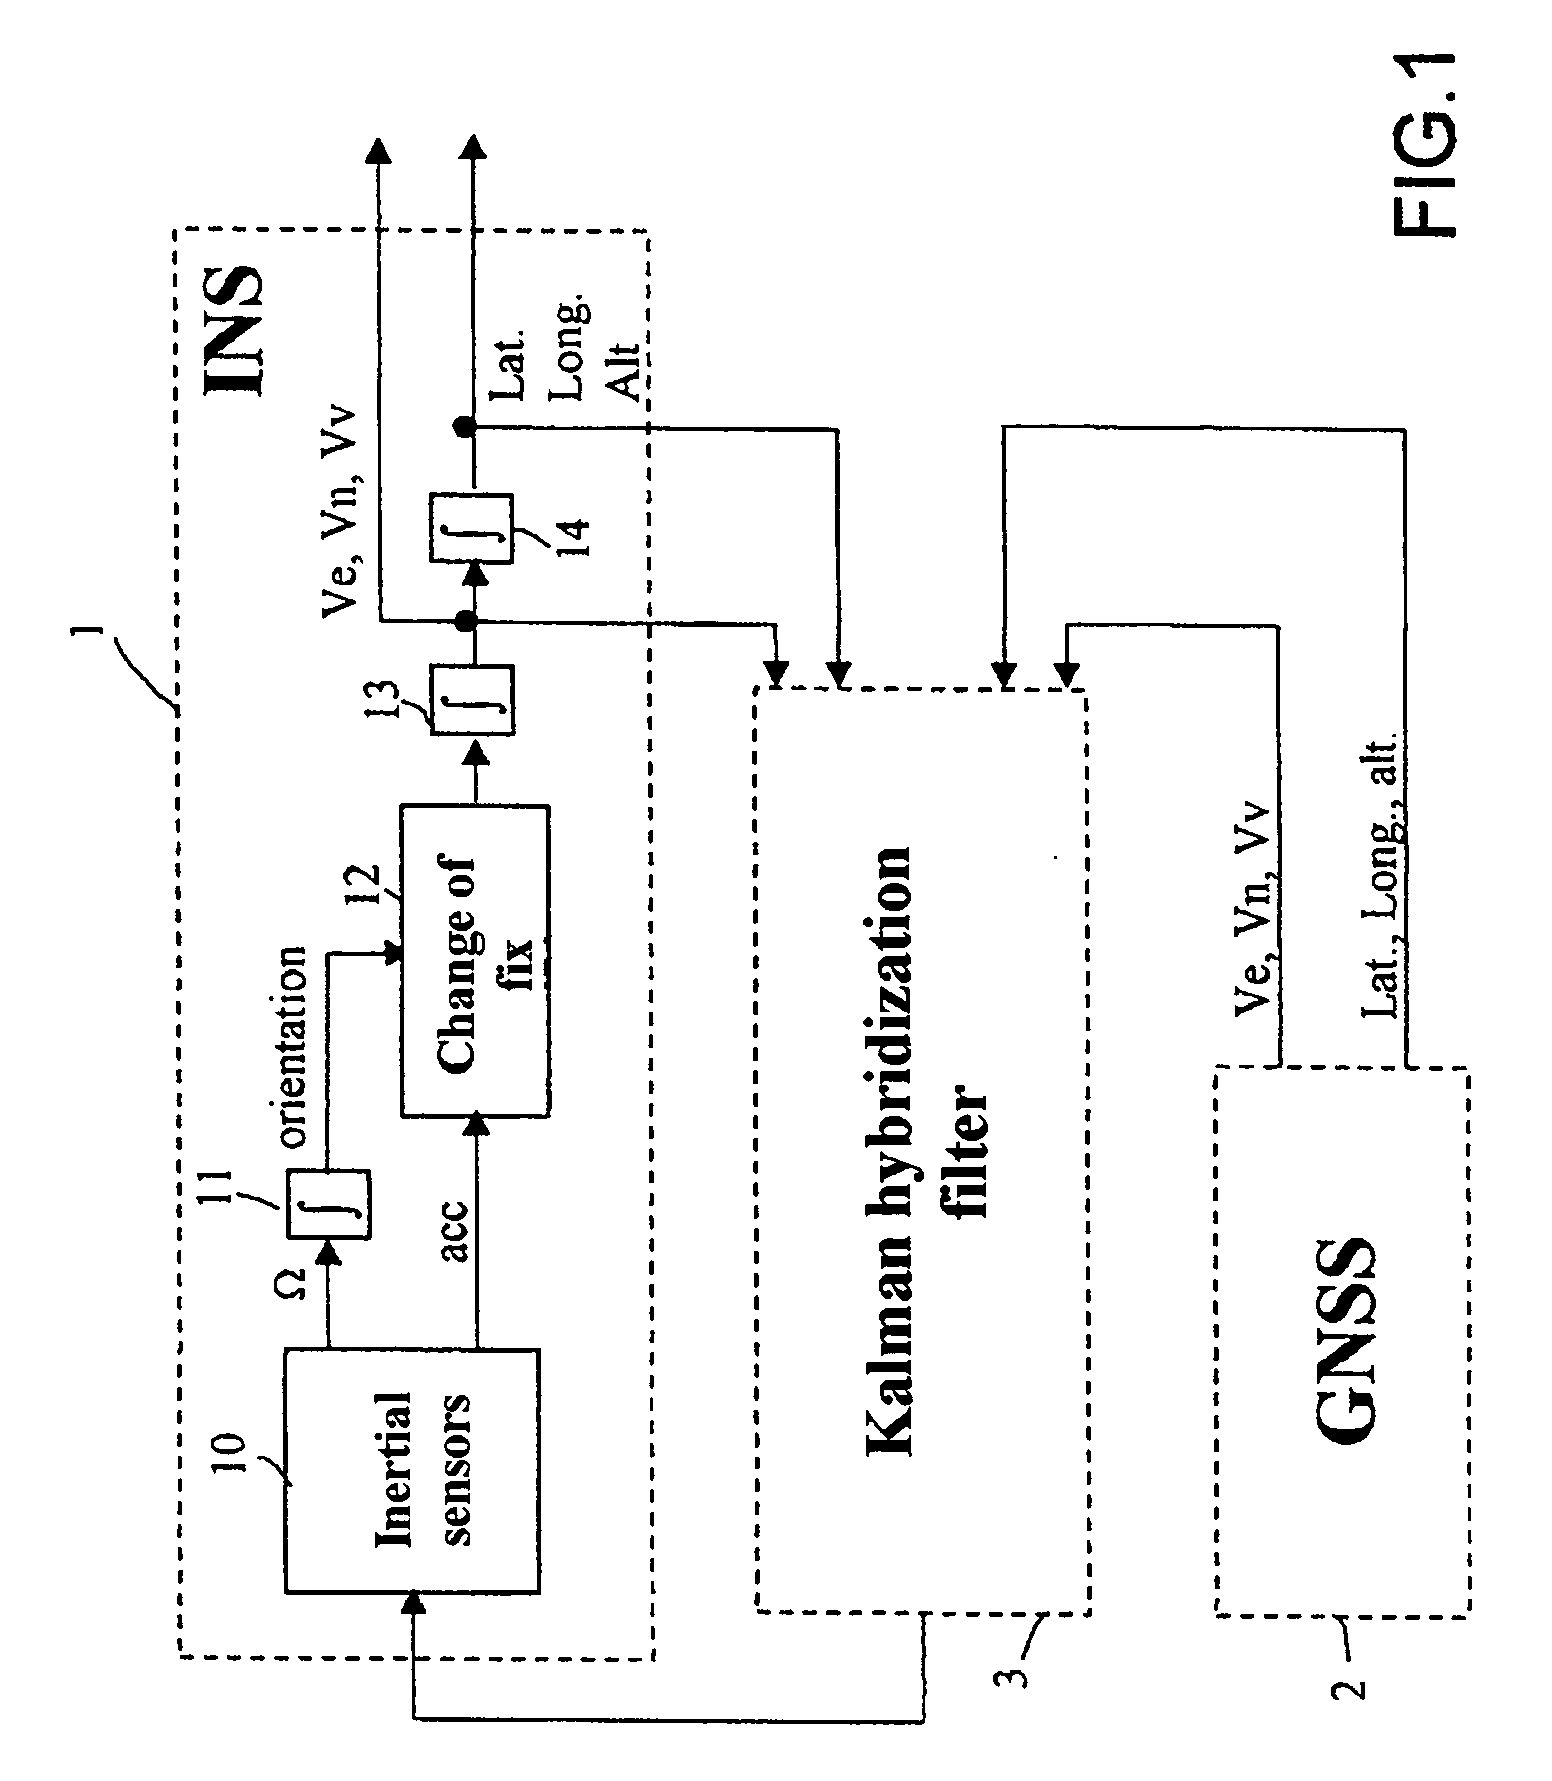 Device for monitoring the integrity of information delivered by a hybrid ins/gnss system